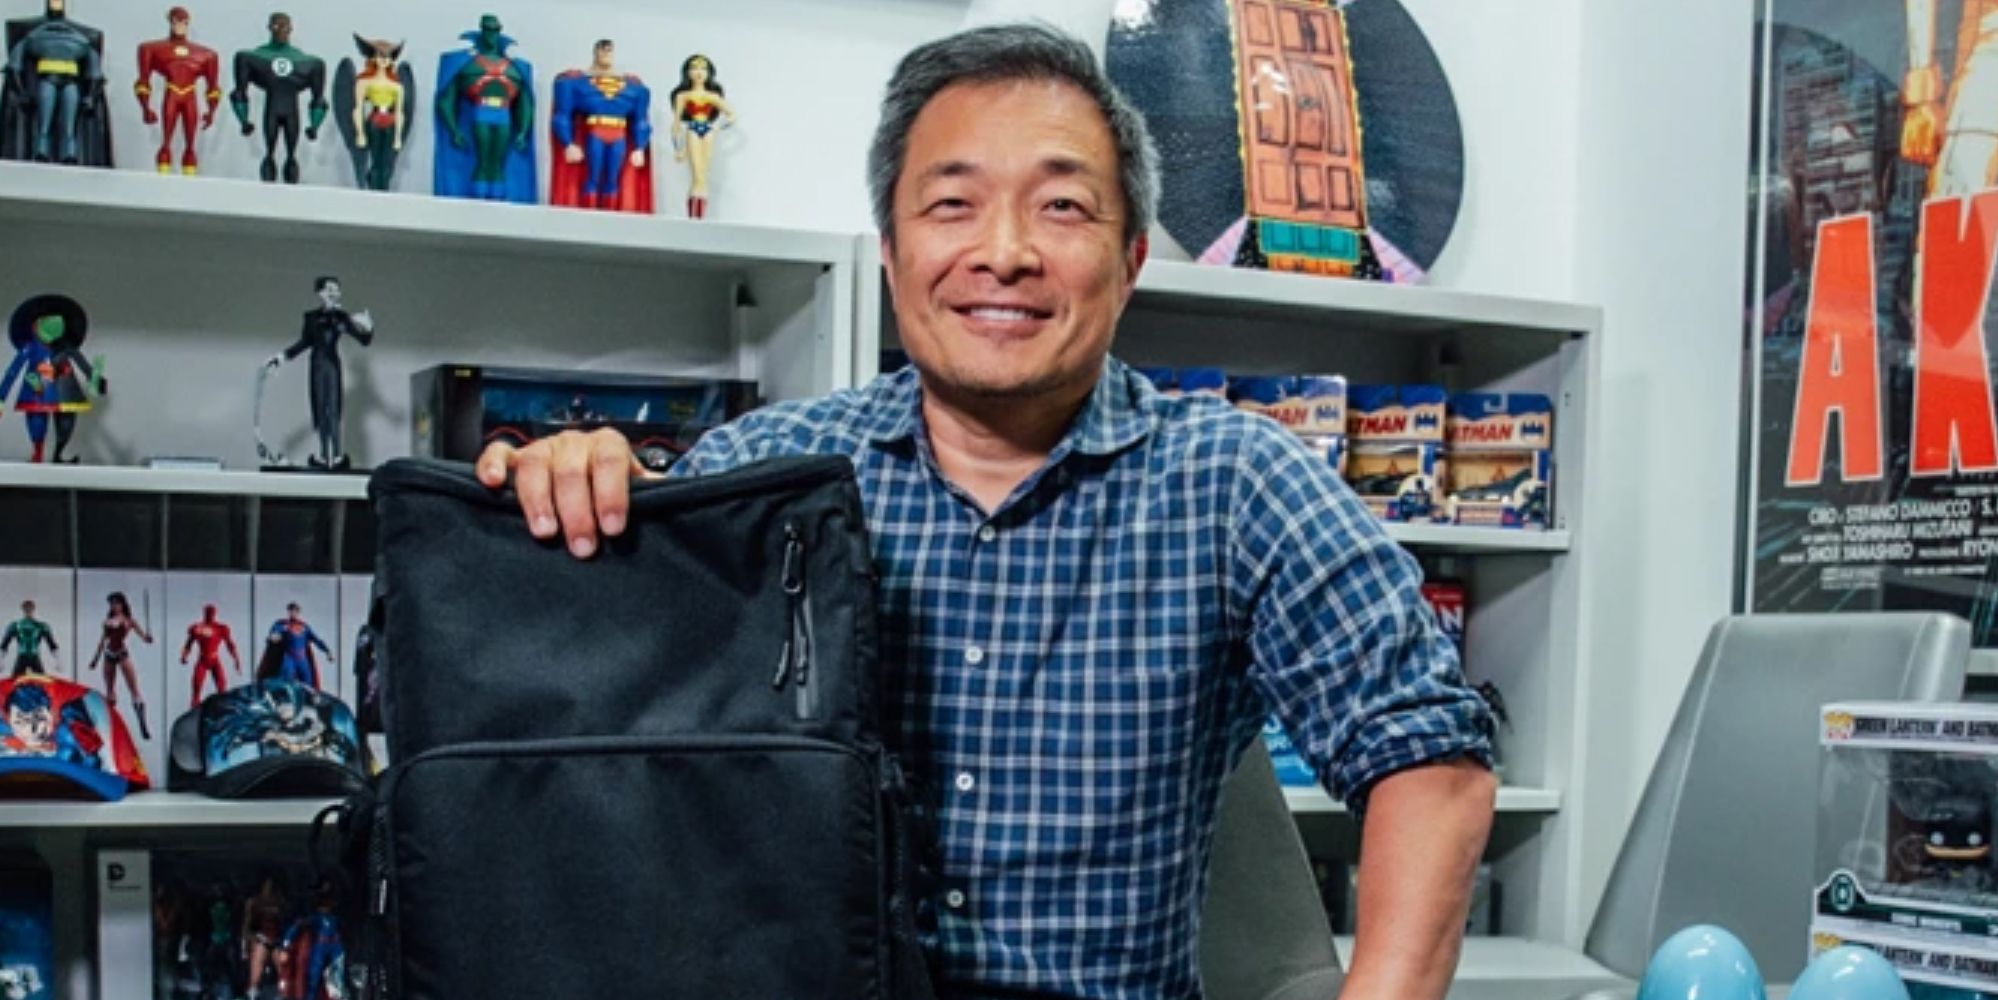 Jim Lee smiling with a backpack